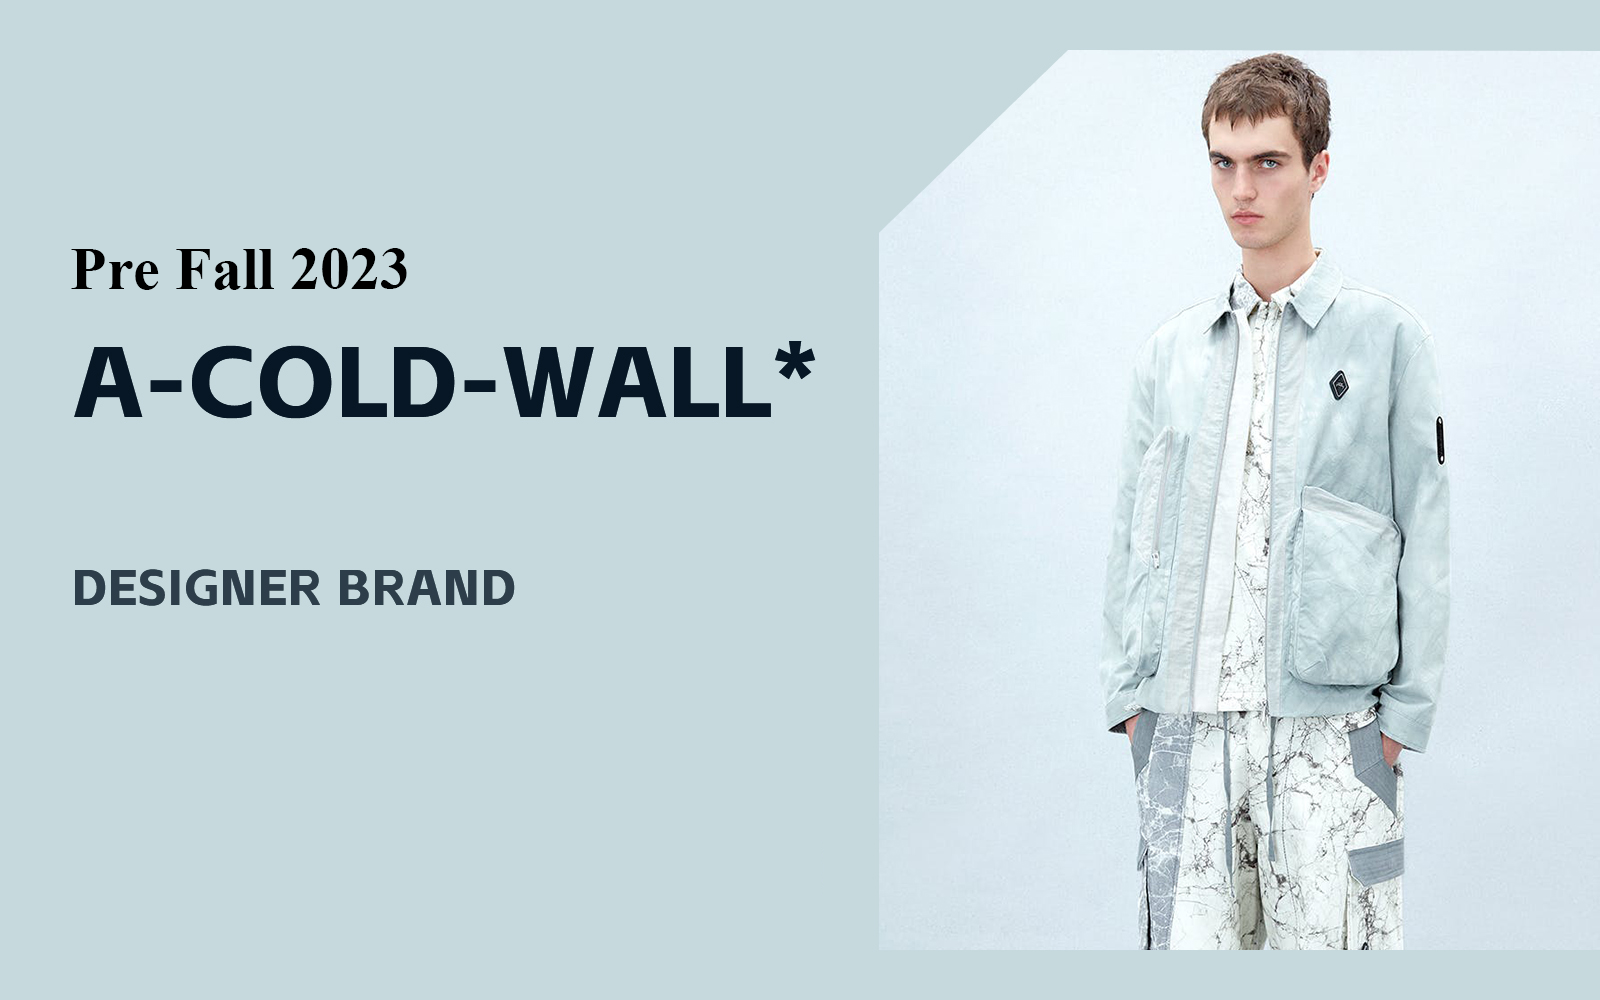 Exploring Function -- The Analysis of A-COLD-WALL* The Menswear Designer Brand